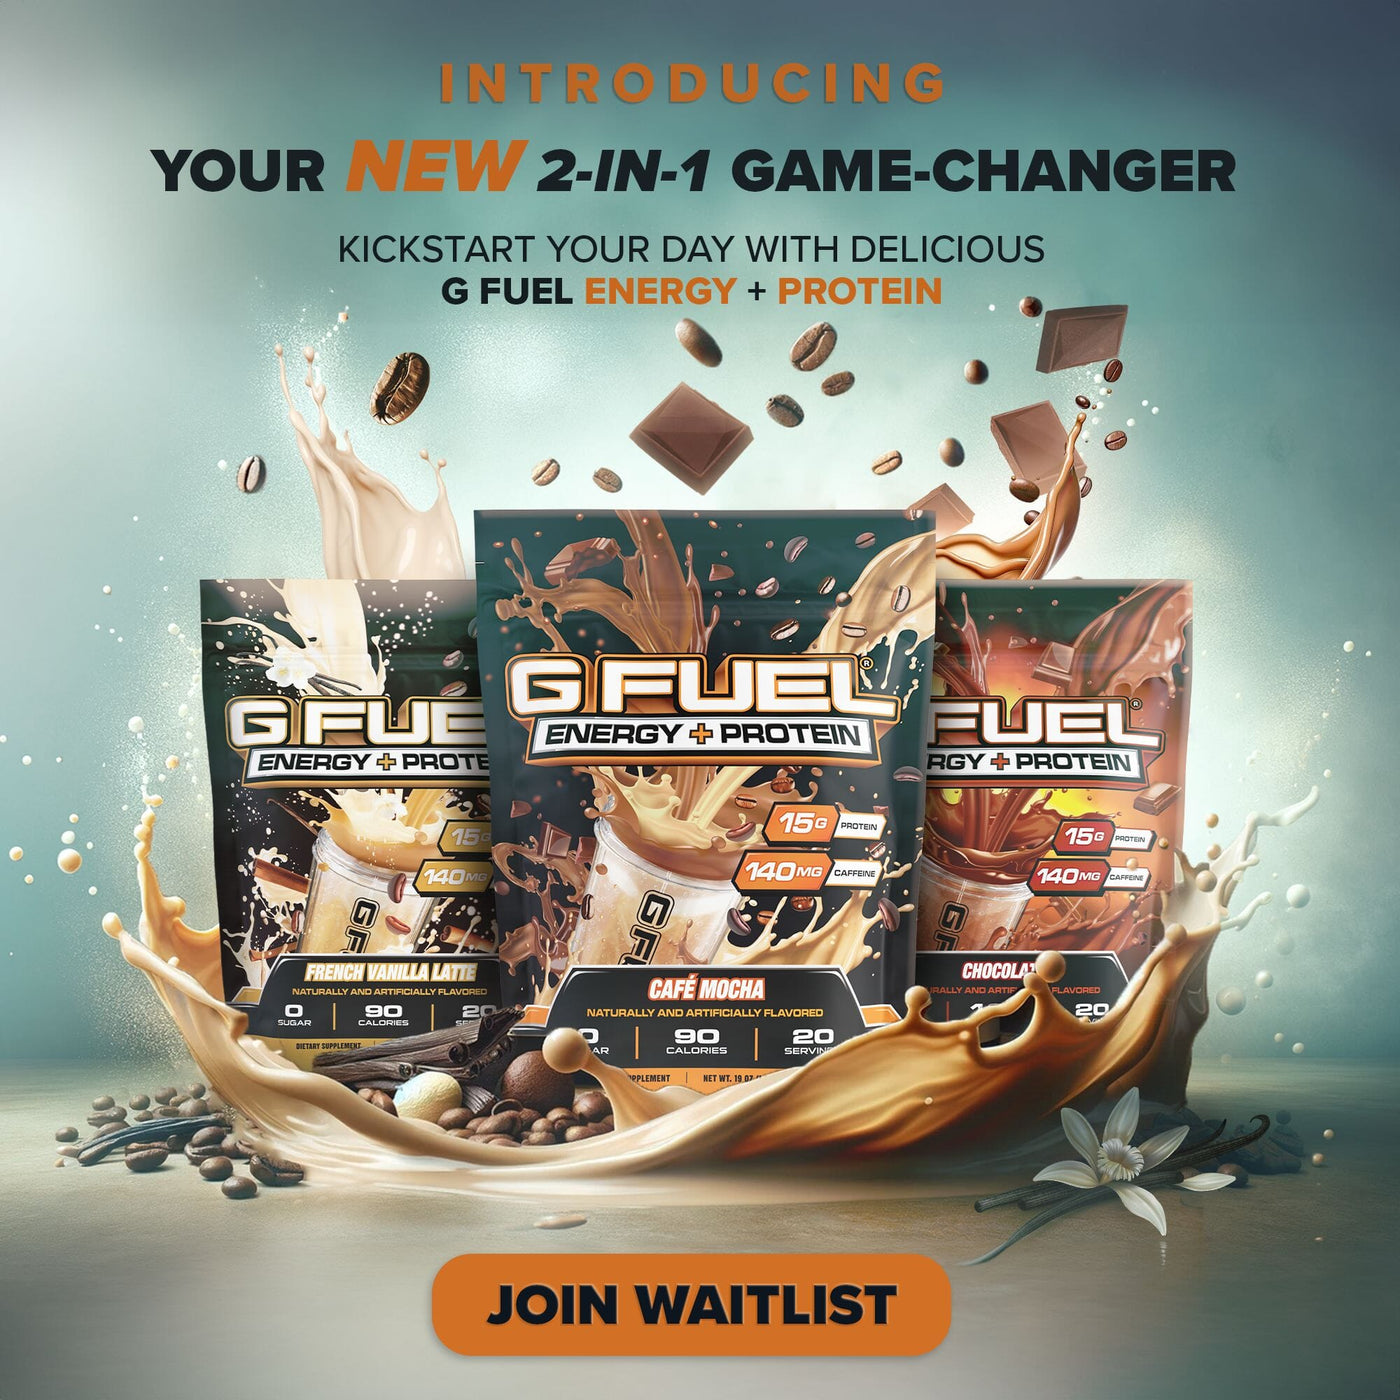 Introducing Your New 2-In-1 Game-Changer, In 3 Craveable Flavors | G FUEL Energy + Protein | Click to Join the Waitlist Now